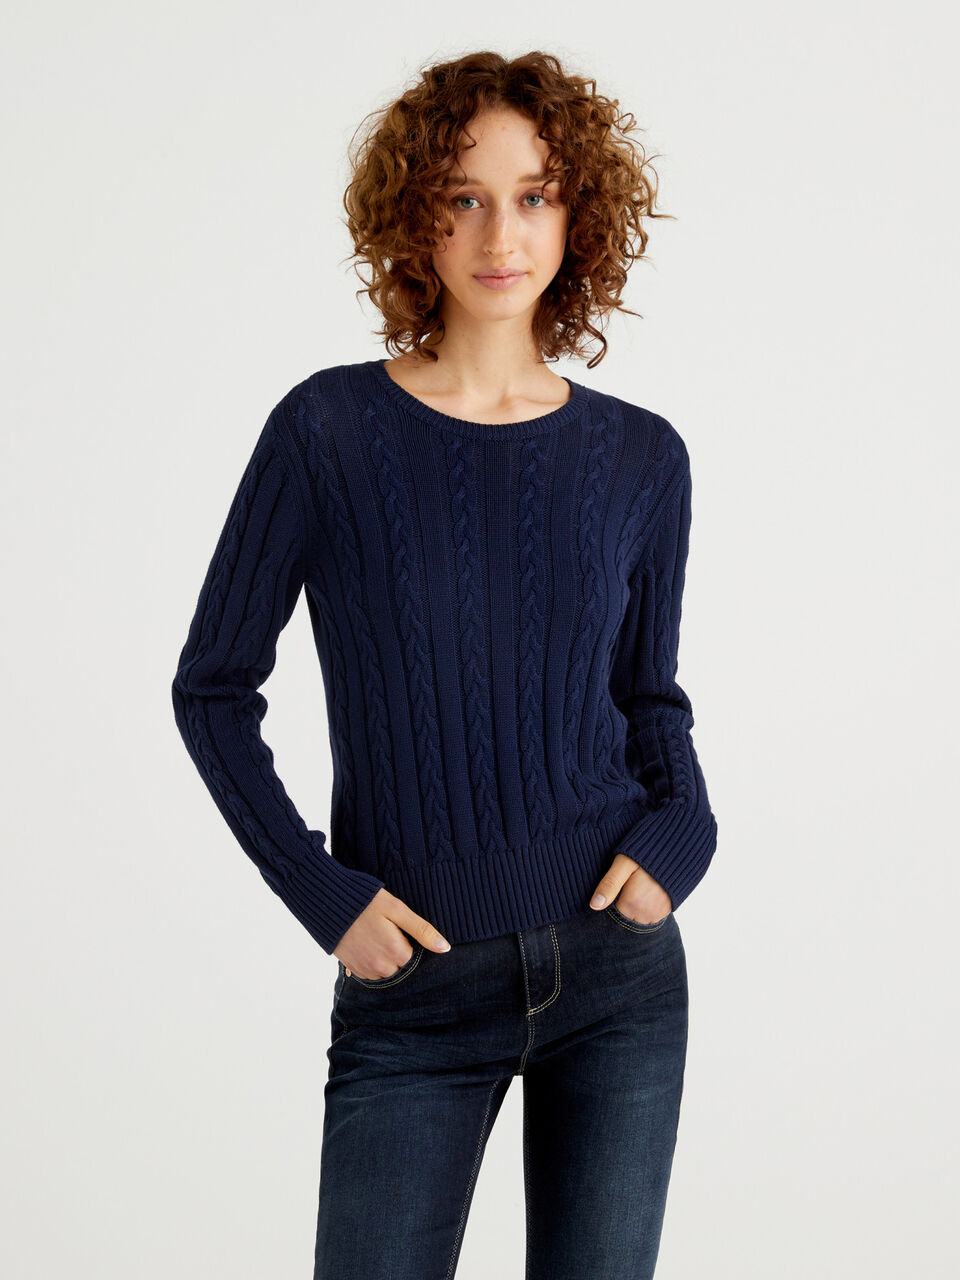 Cotton sweater with cable knit